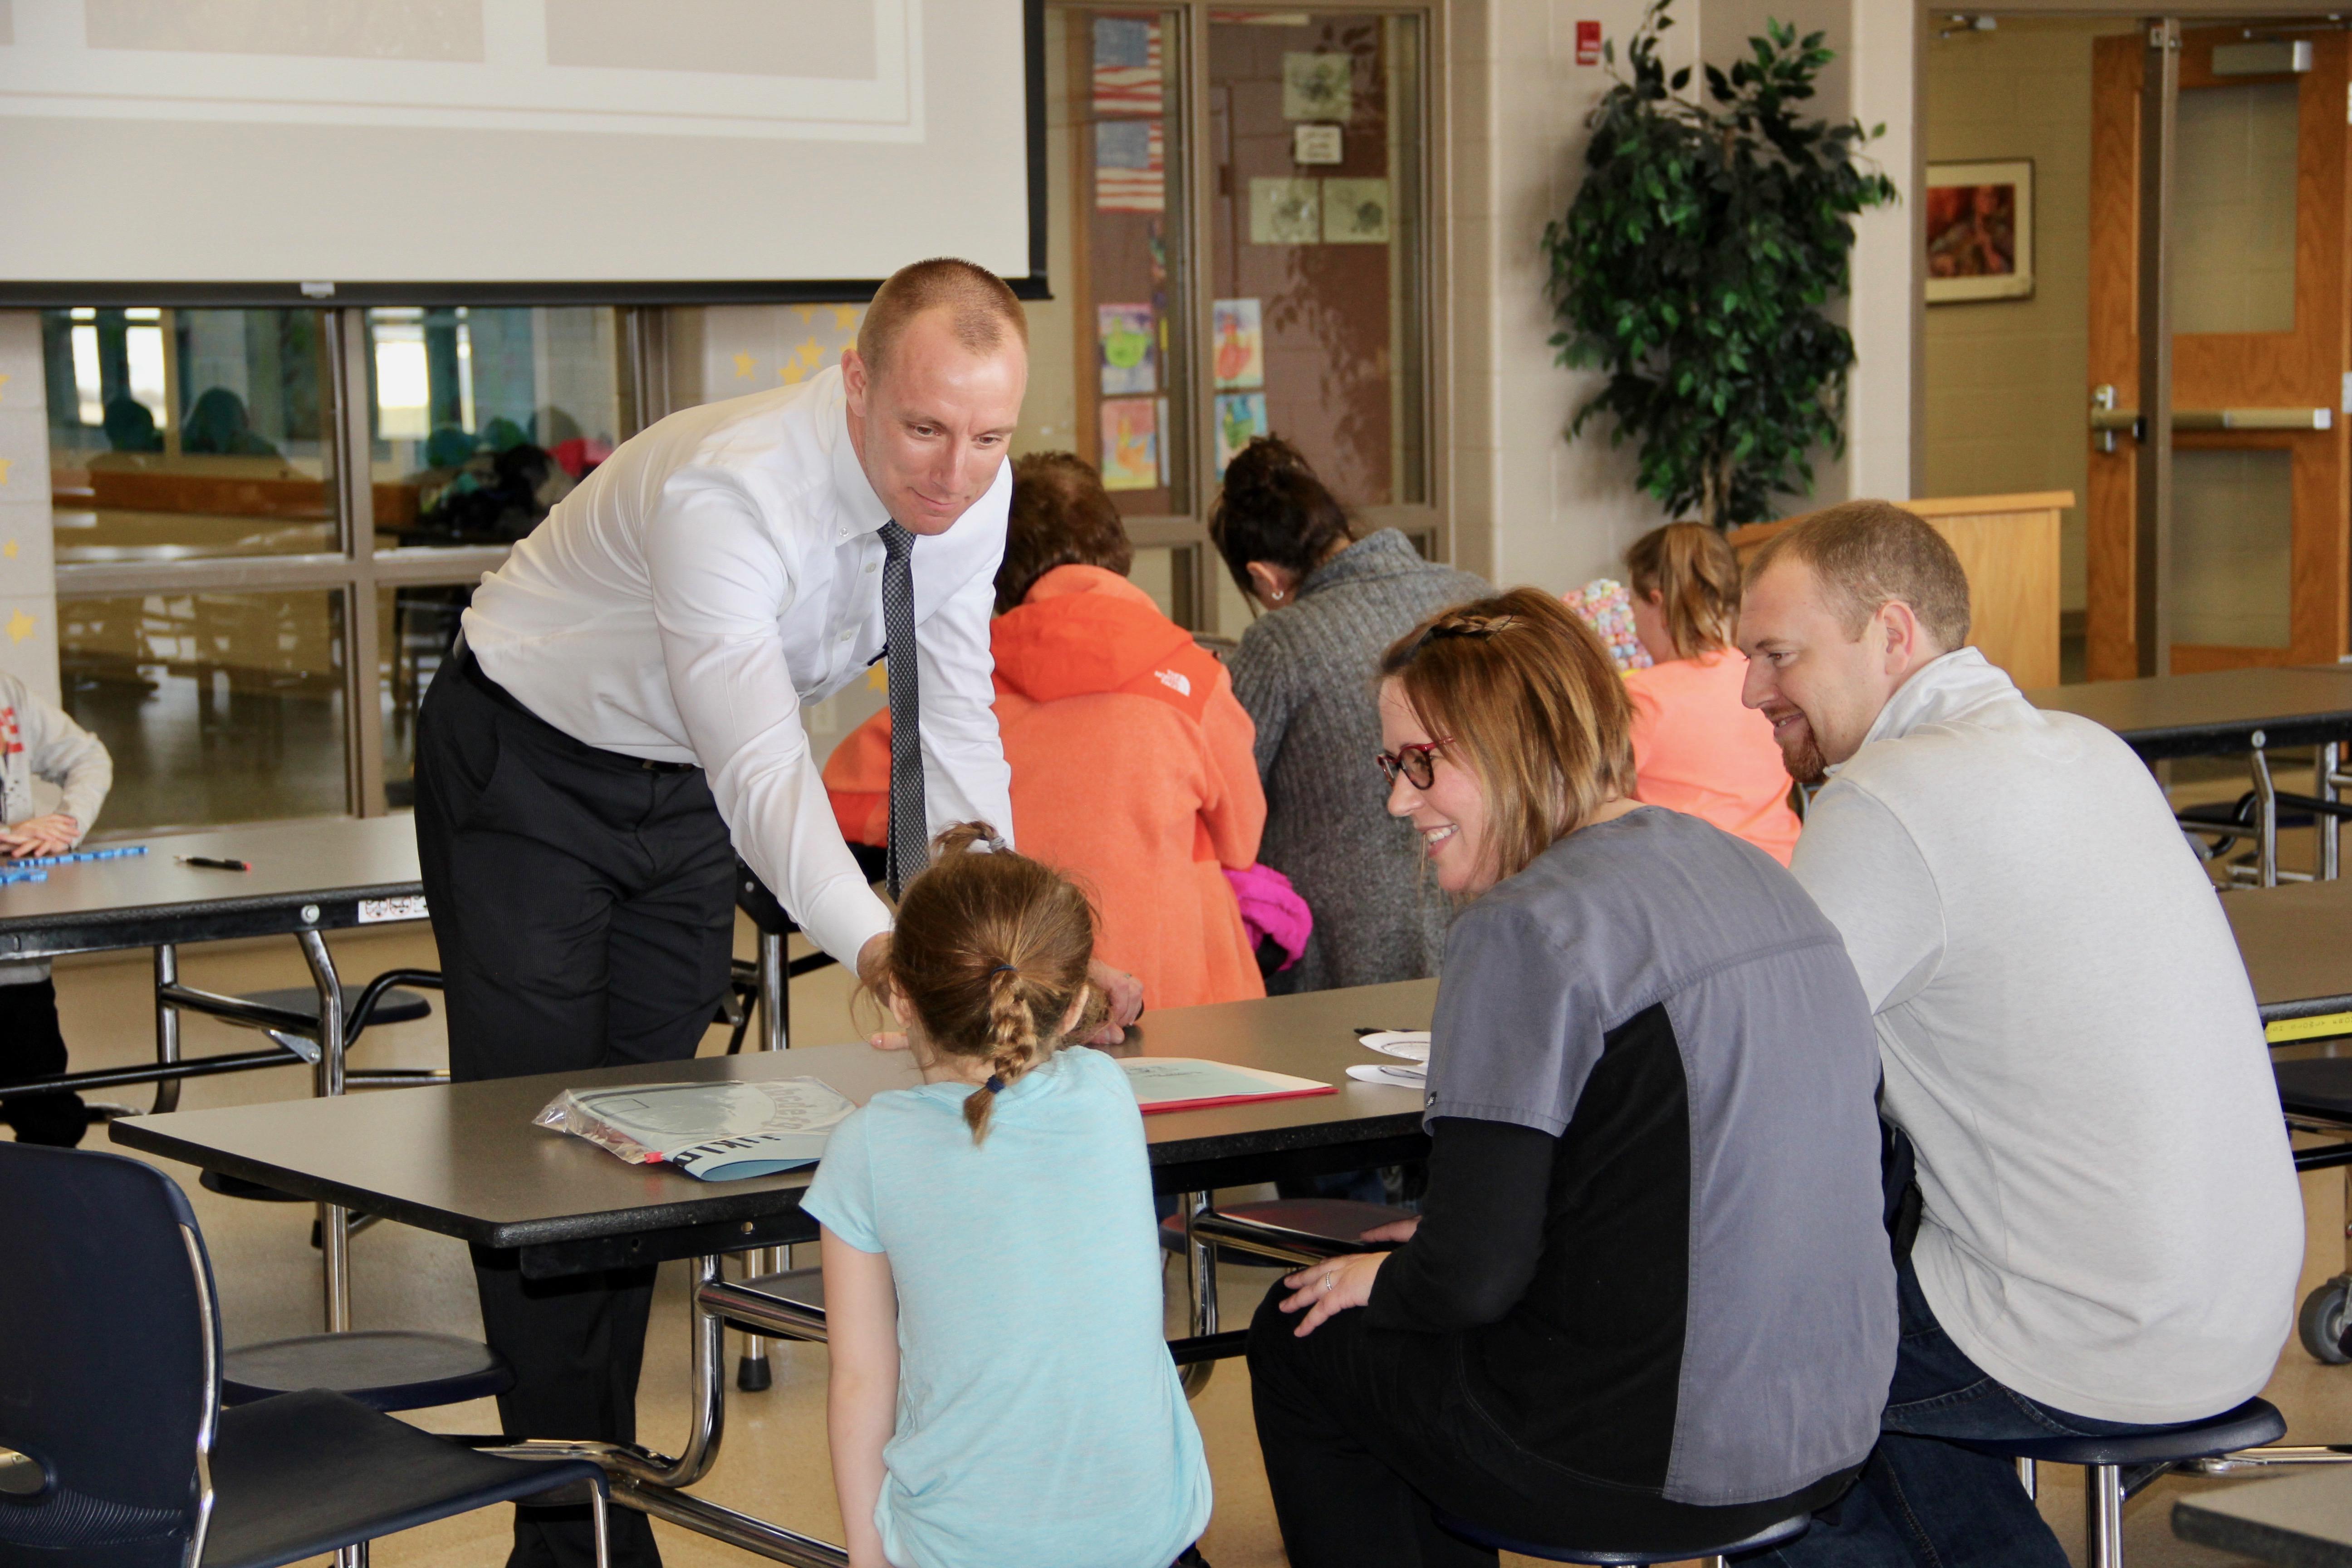 Menominee Elementary School Principal Steven Boyer talks to parents about how he and his staff can help incoming kindergarten children and parents prepare for the start of school.